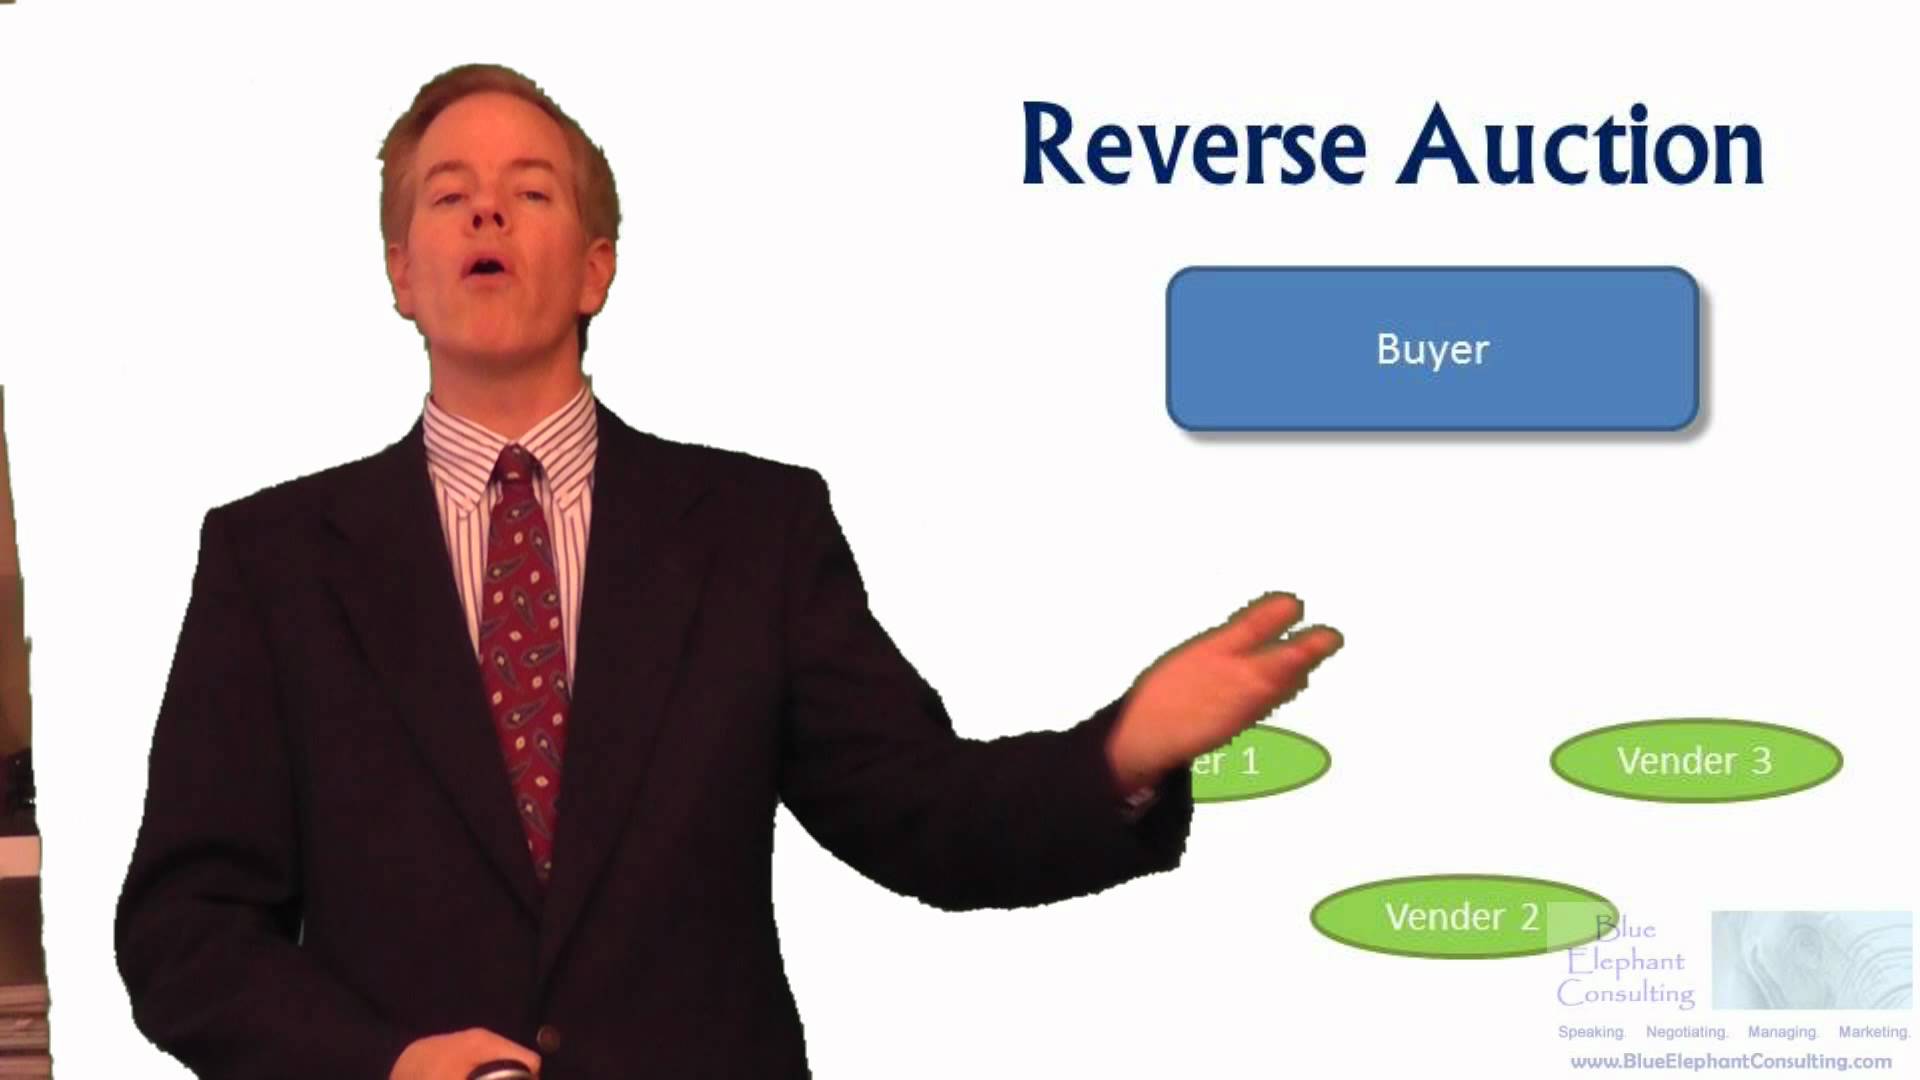 Secrets To Winning Reverse Auctions: What Is A Reverse Auction & What Is Reverse Auction Bidding?